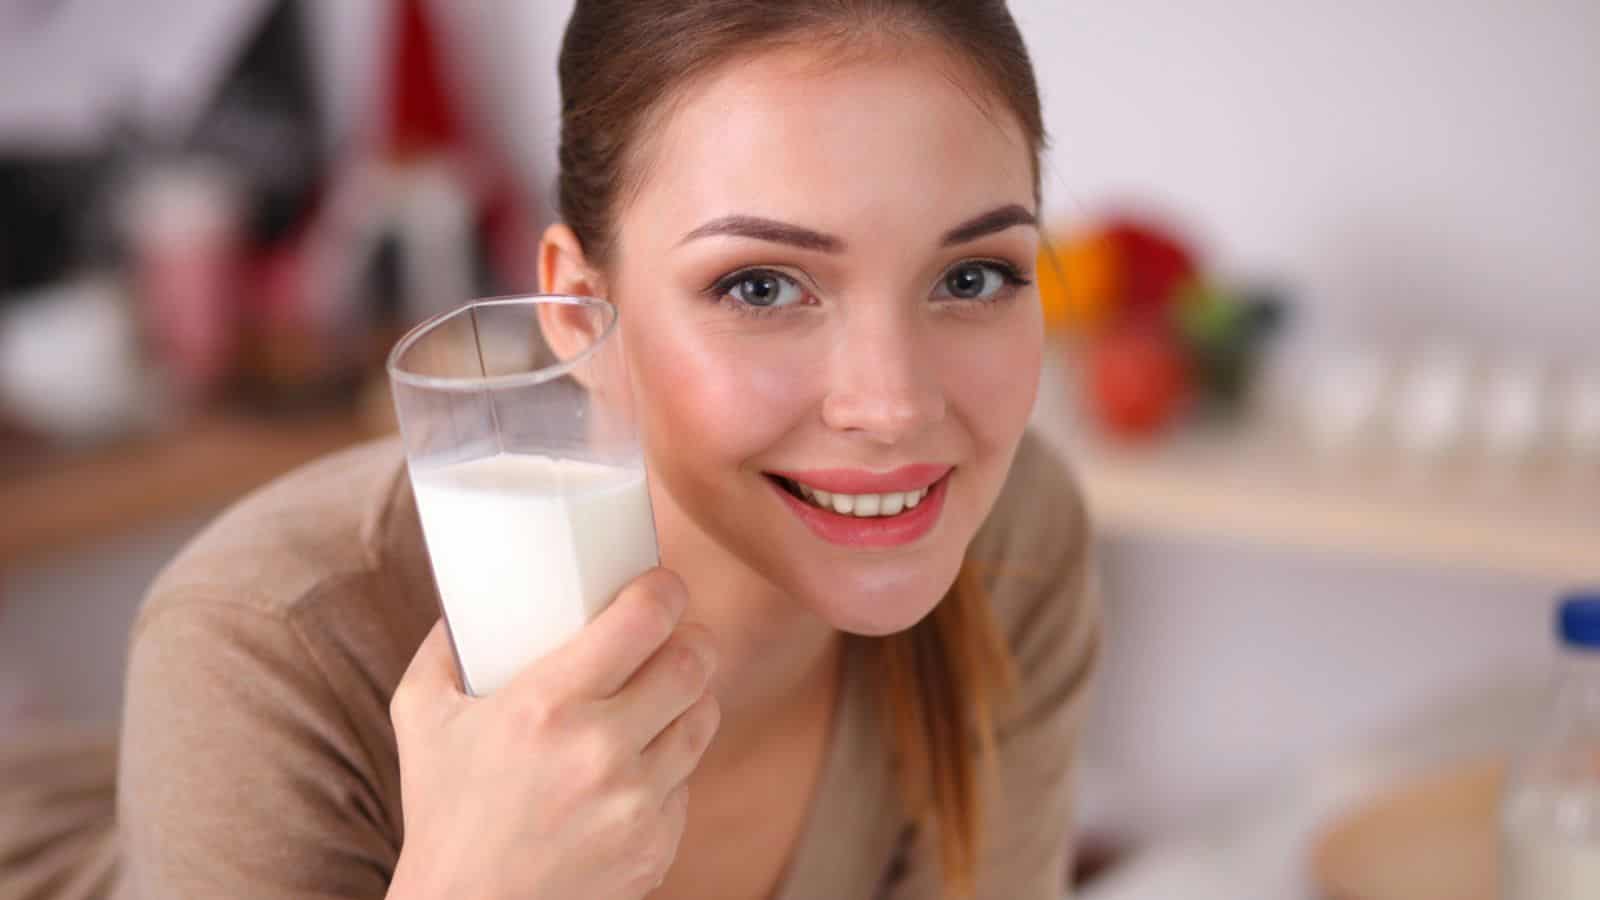 Smiling young woman drinking milk, standing in the kitchen